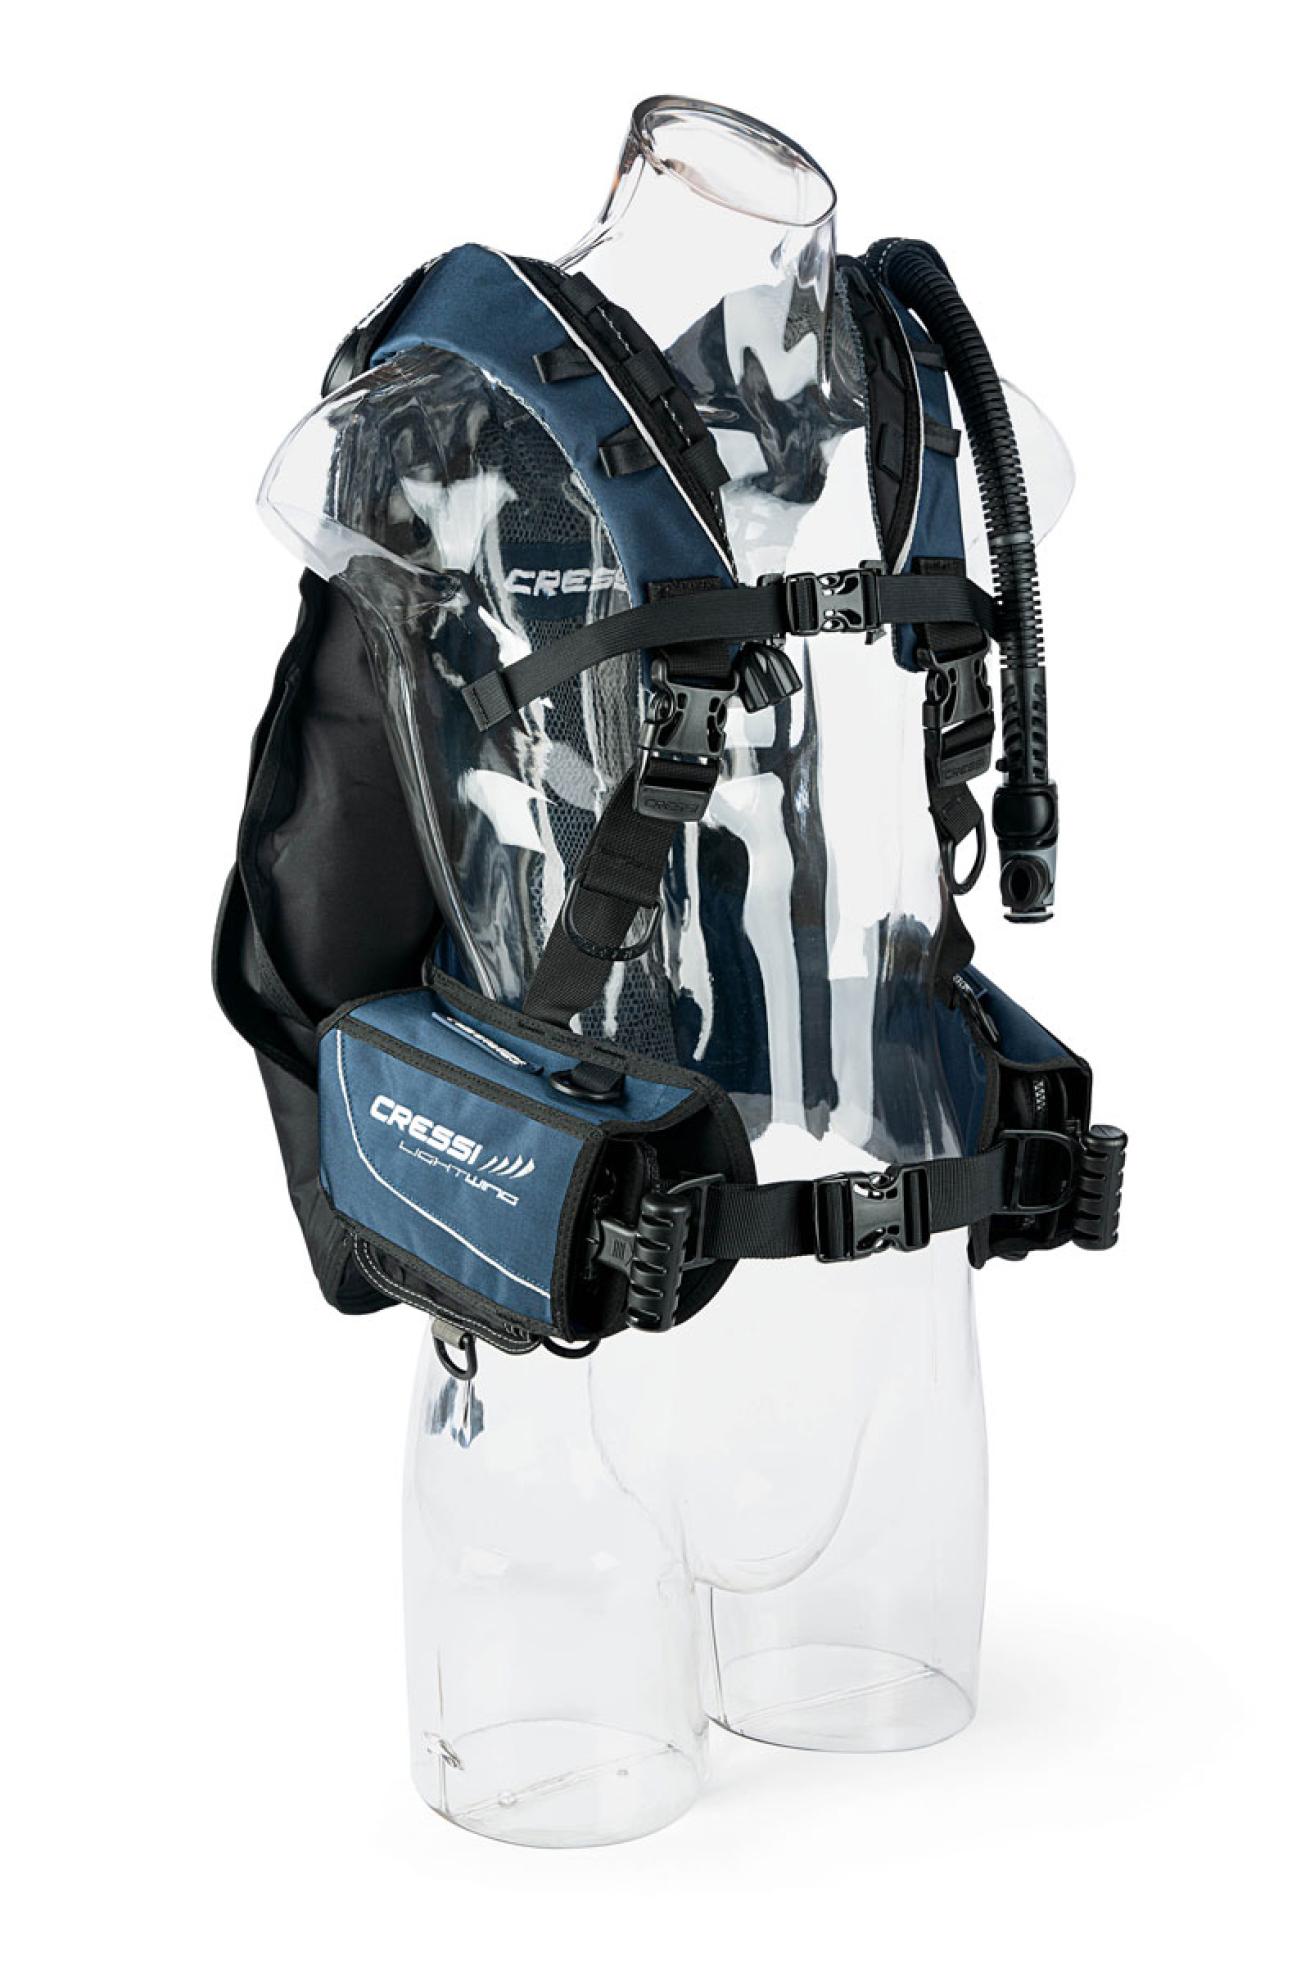 Cressi Lightwing BCD